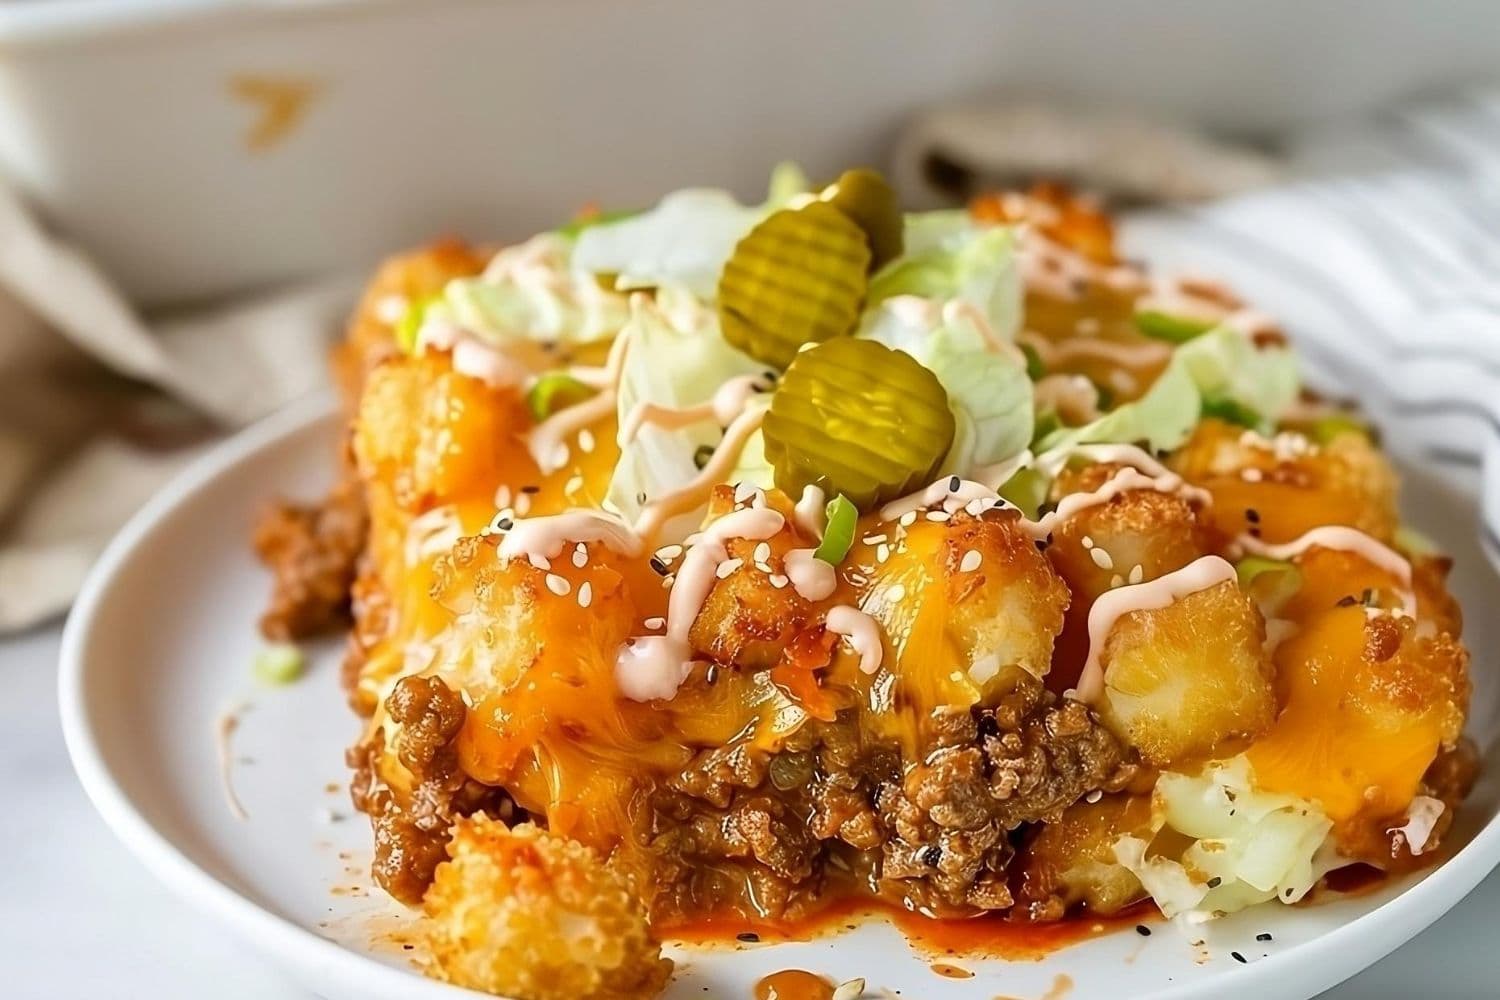 Casserole with tater tots and ground beef in cheesy sauce served in a white plate.